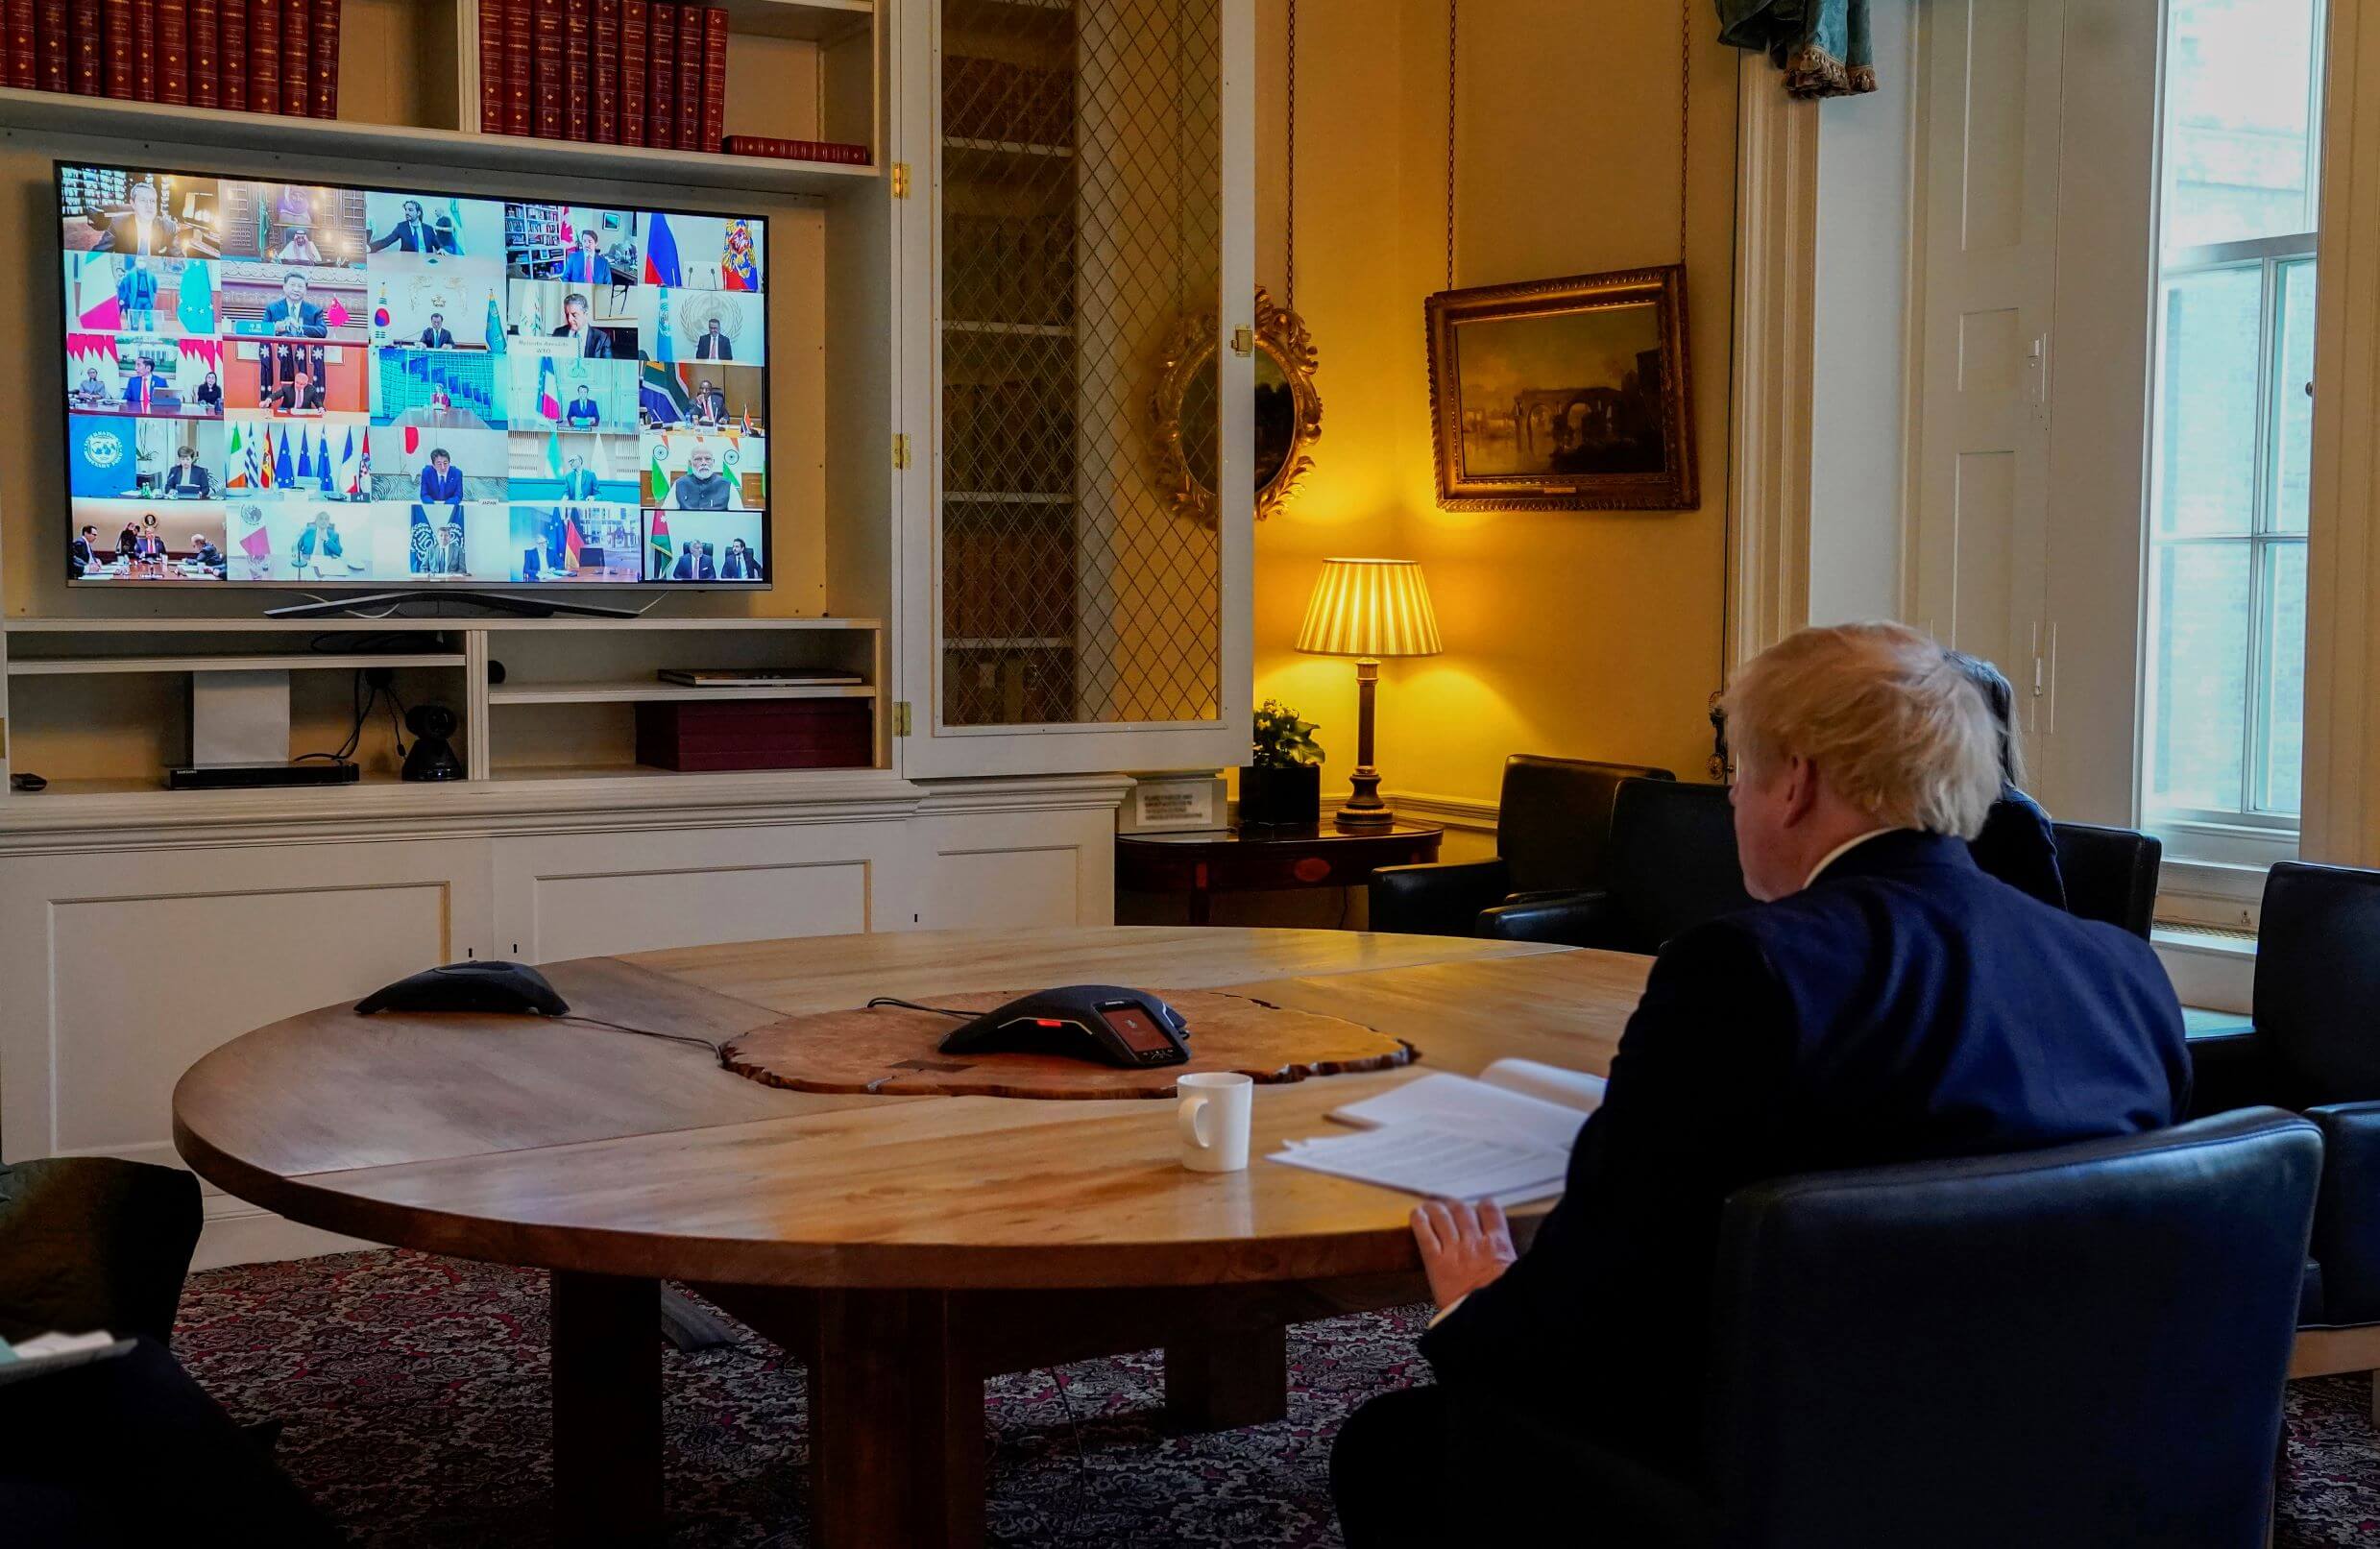 Prime Minister Boris Johnson on a video conference call to other G20 leaders during the coronavirus. © Number 10 / Flickr